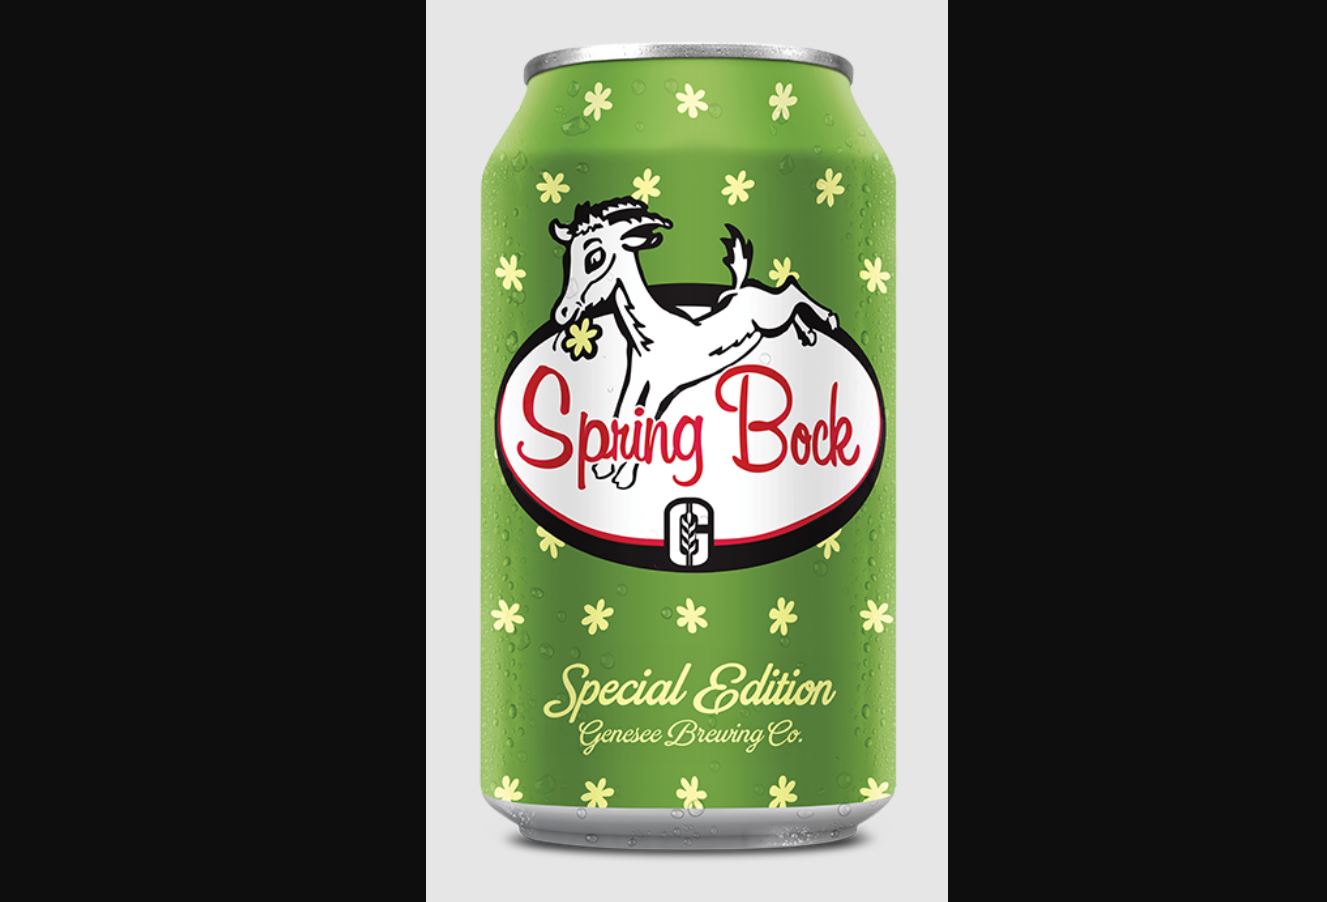 10-bock-beers-that-will-help-you-catch-that-spring-feeling